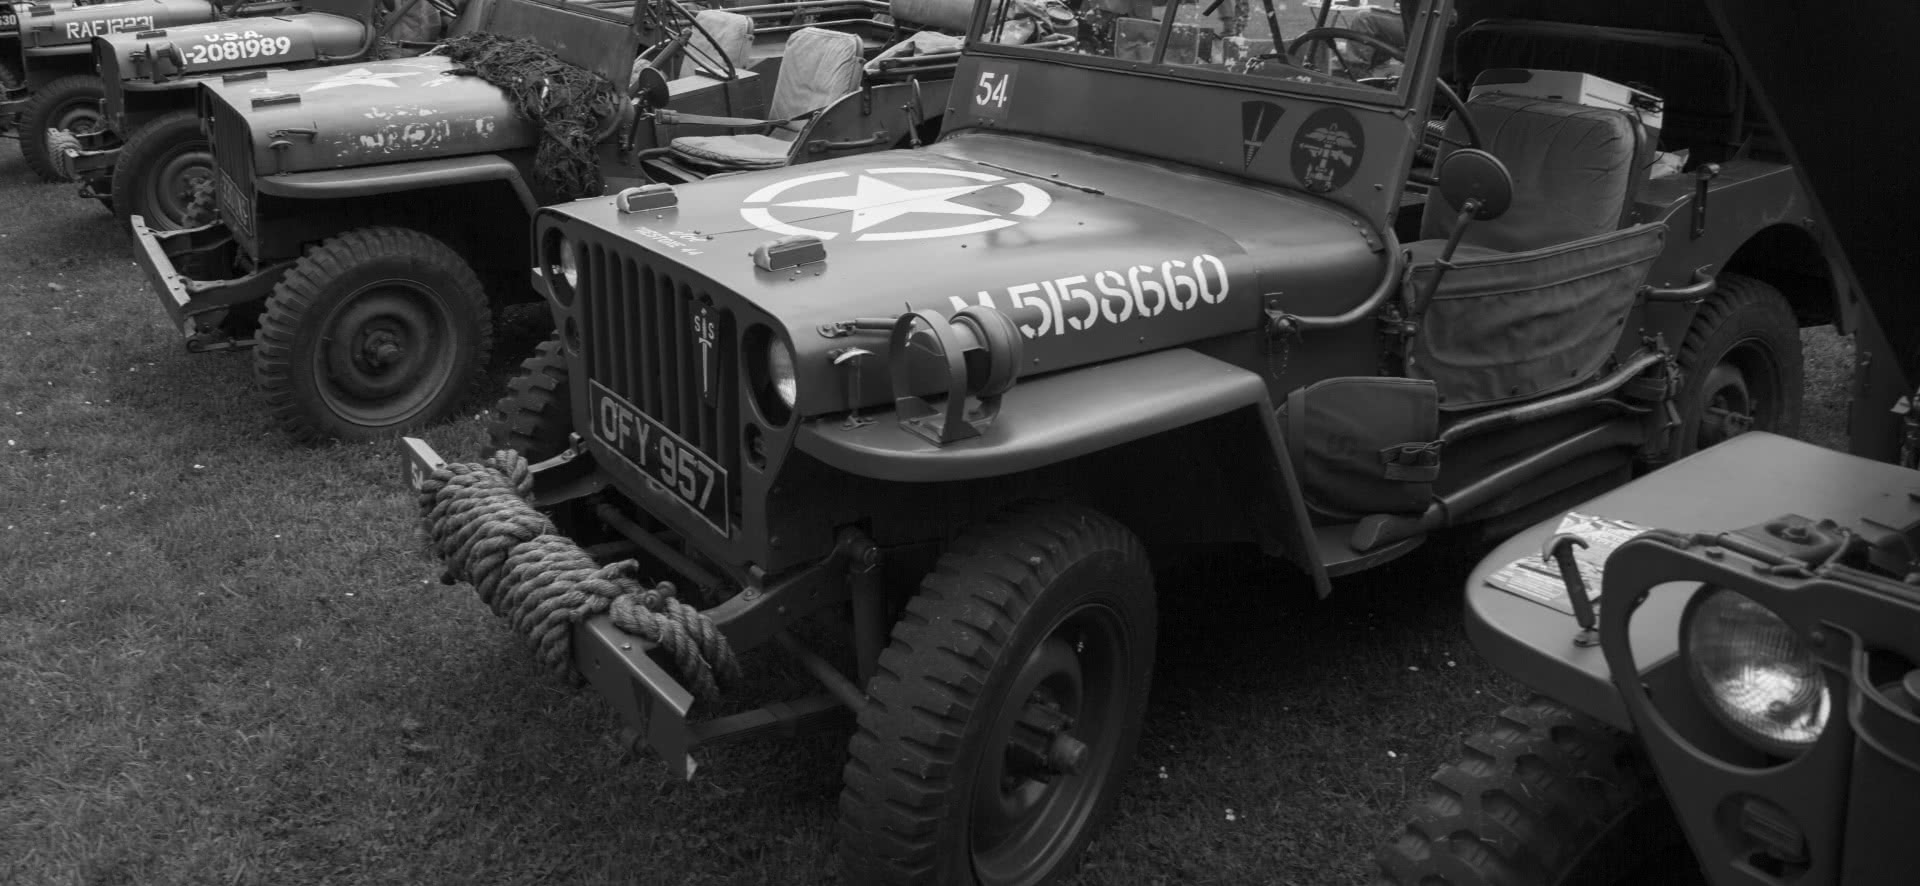 The JEEP History image